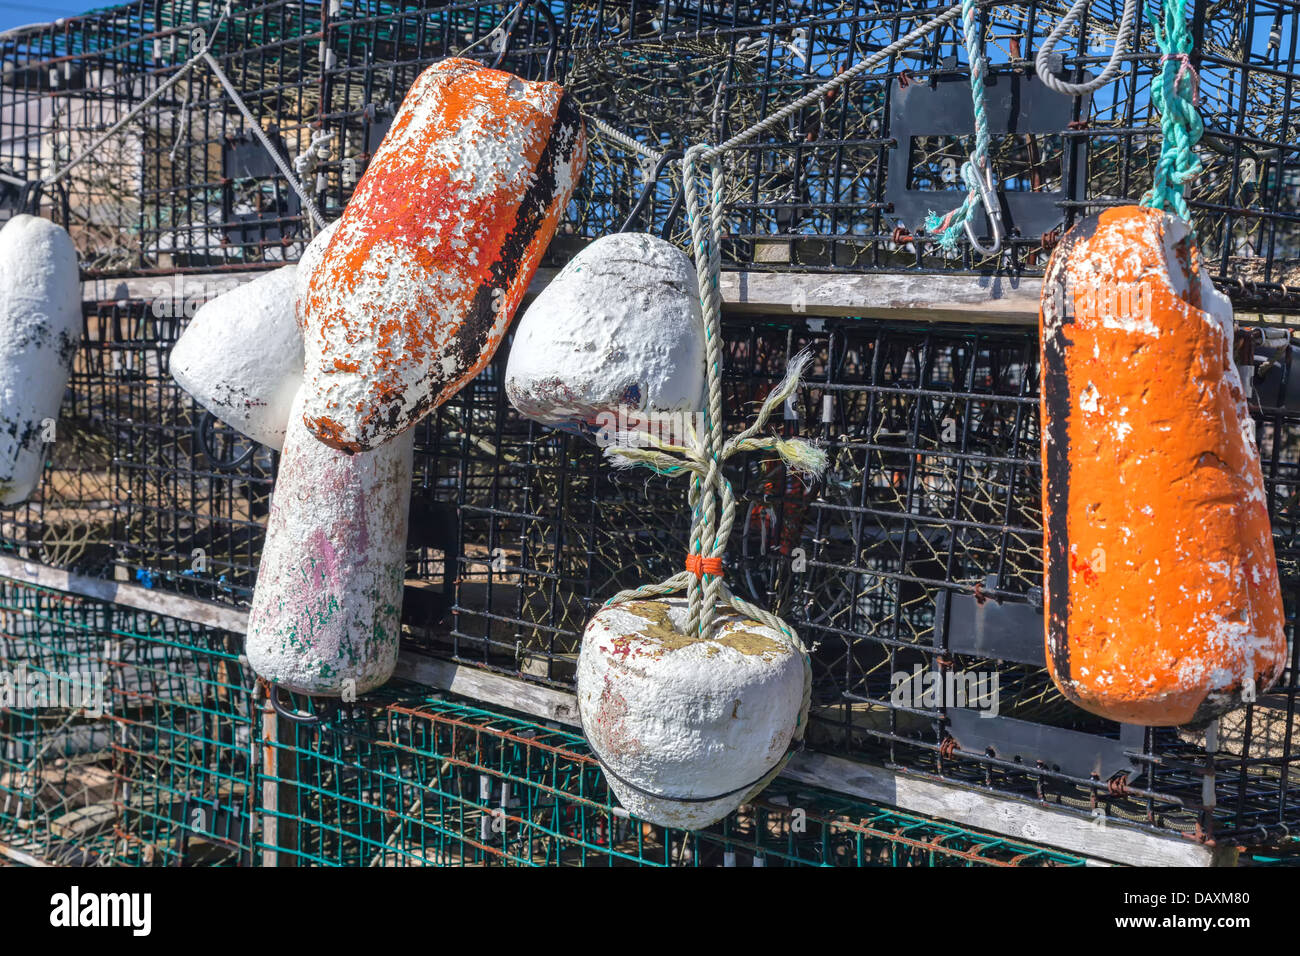 Weathered buoys and traditional lobster traps on the wharf. Stock Photo